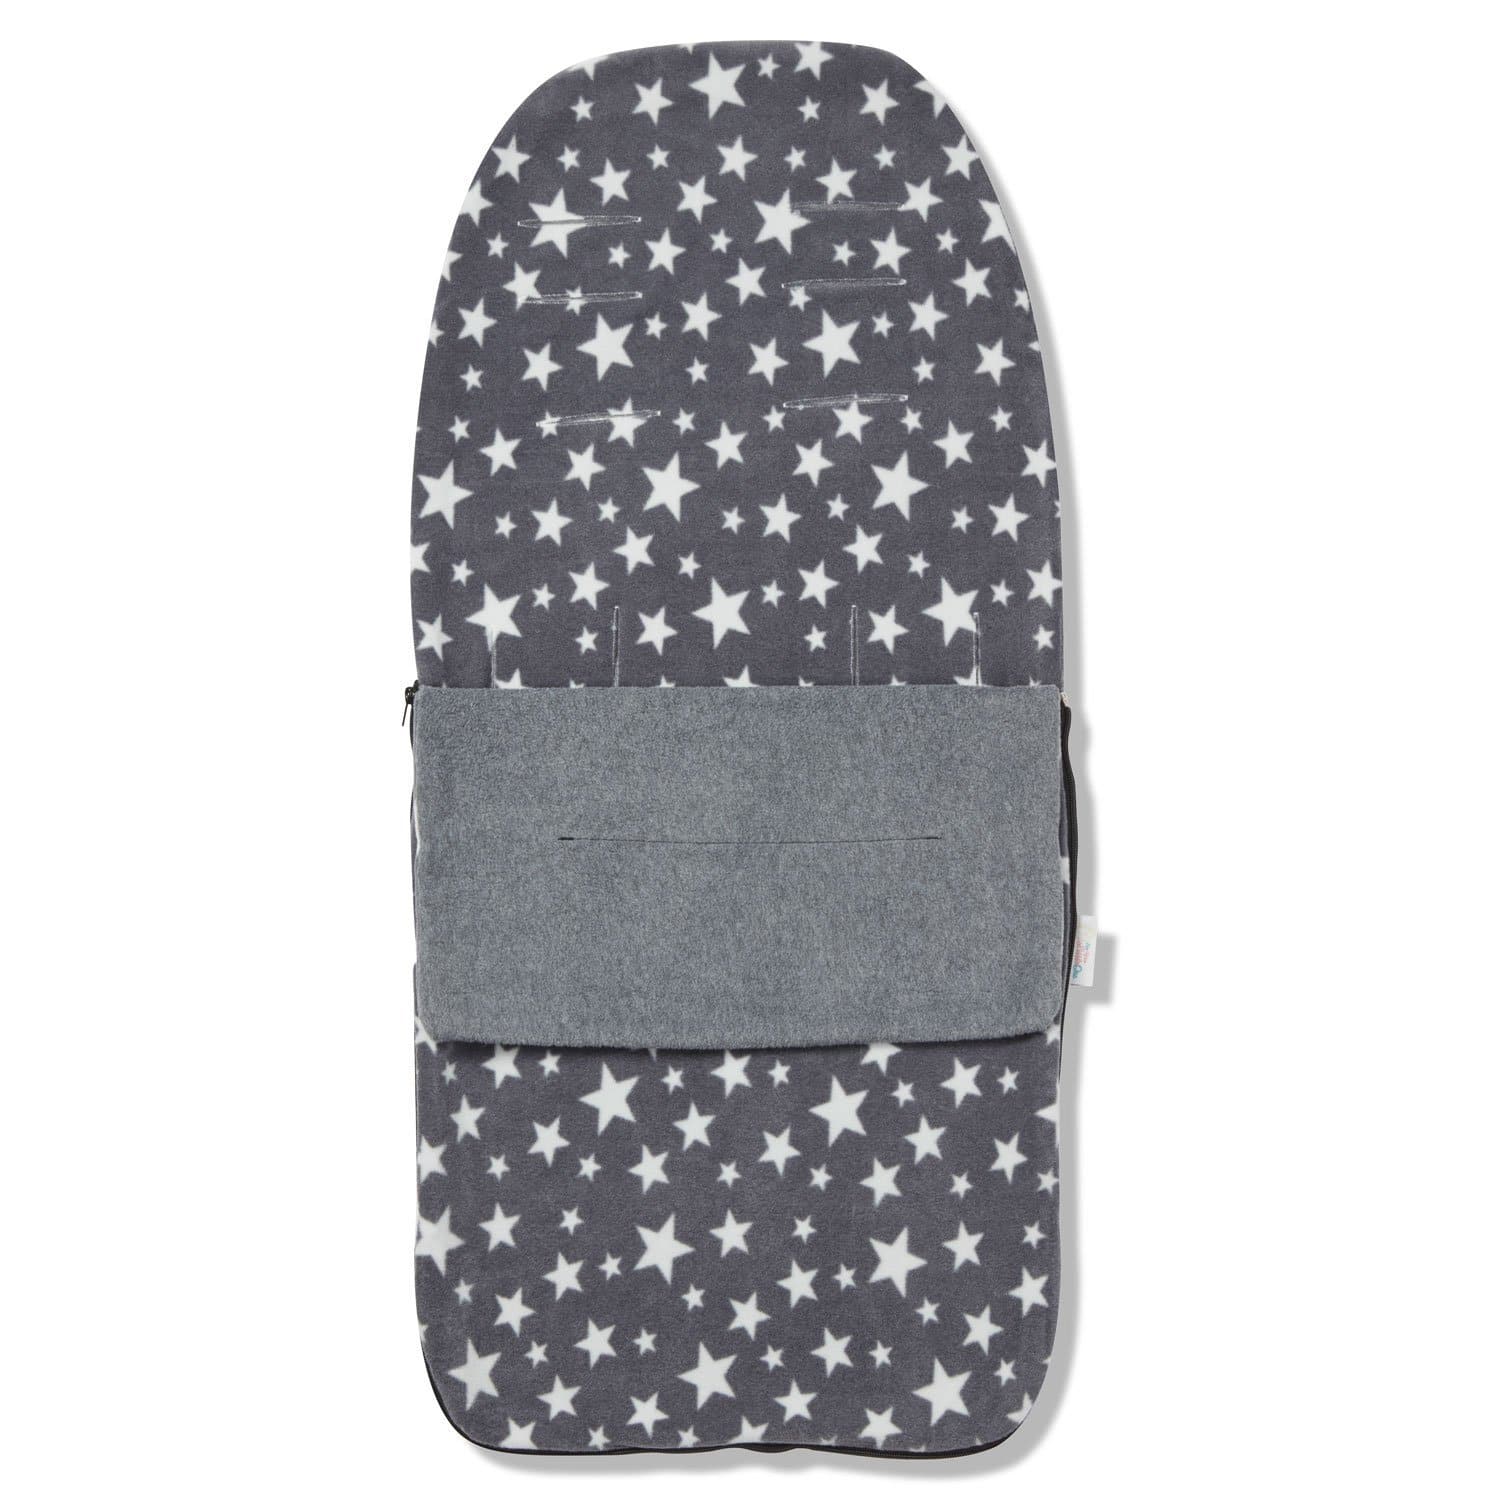 Snuggle Summer Footmuff Compatible with Maclaren - For Your Little One